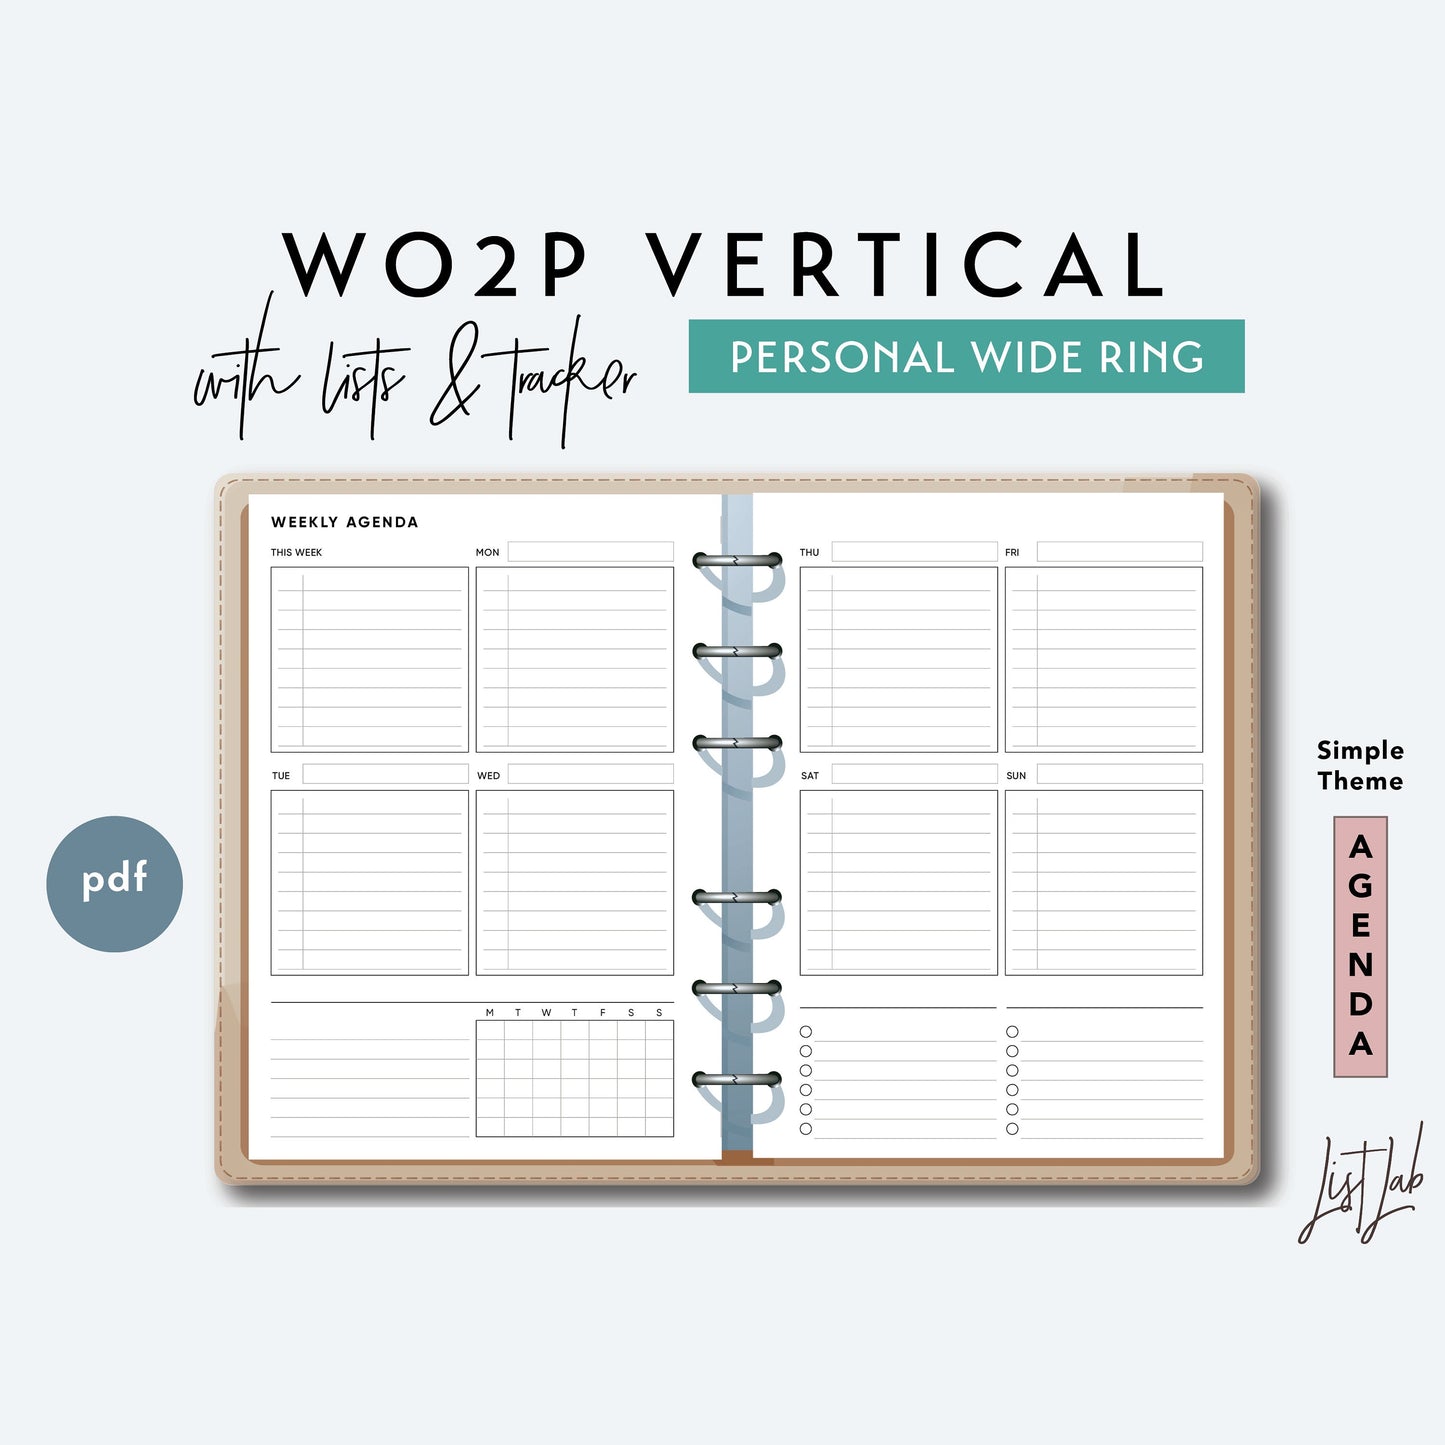 Personal Wide Ring Wo2P VERTICAL - with Lists and Tracker Printable Insert Set